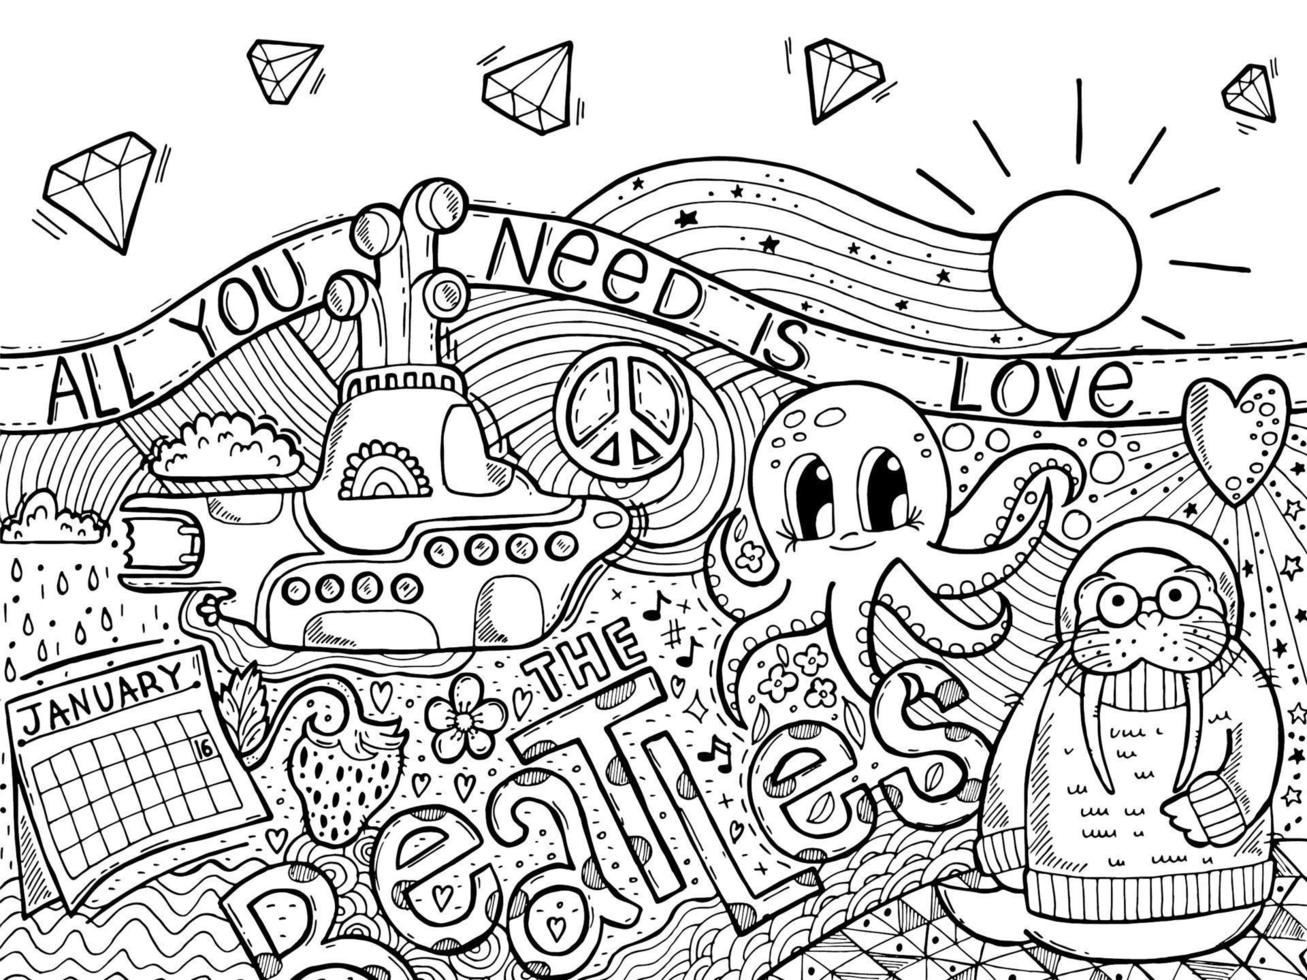 The Beatles songs. Hand-drawn zendoodle, zen art. All you need is love.  Octopus's Garden. Yellow Submarine. The Beatles day - January 16.  Strawberry Fields forever. Lucy in the sky with diamond. 4272720